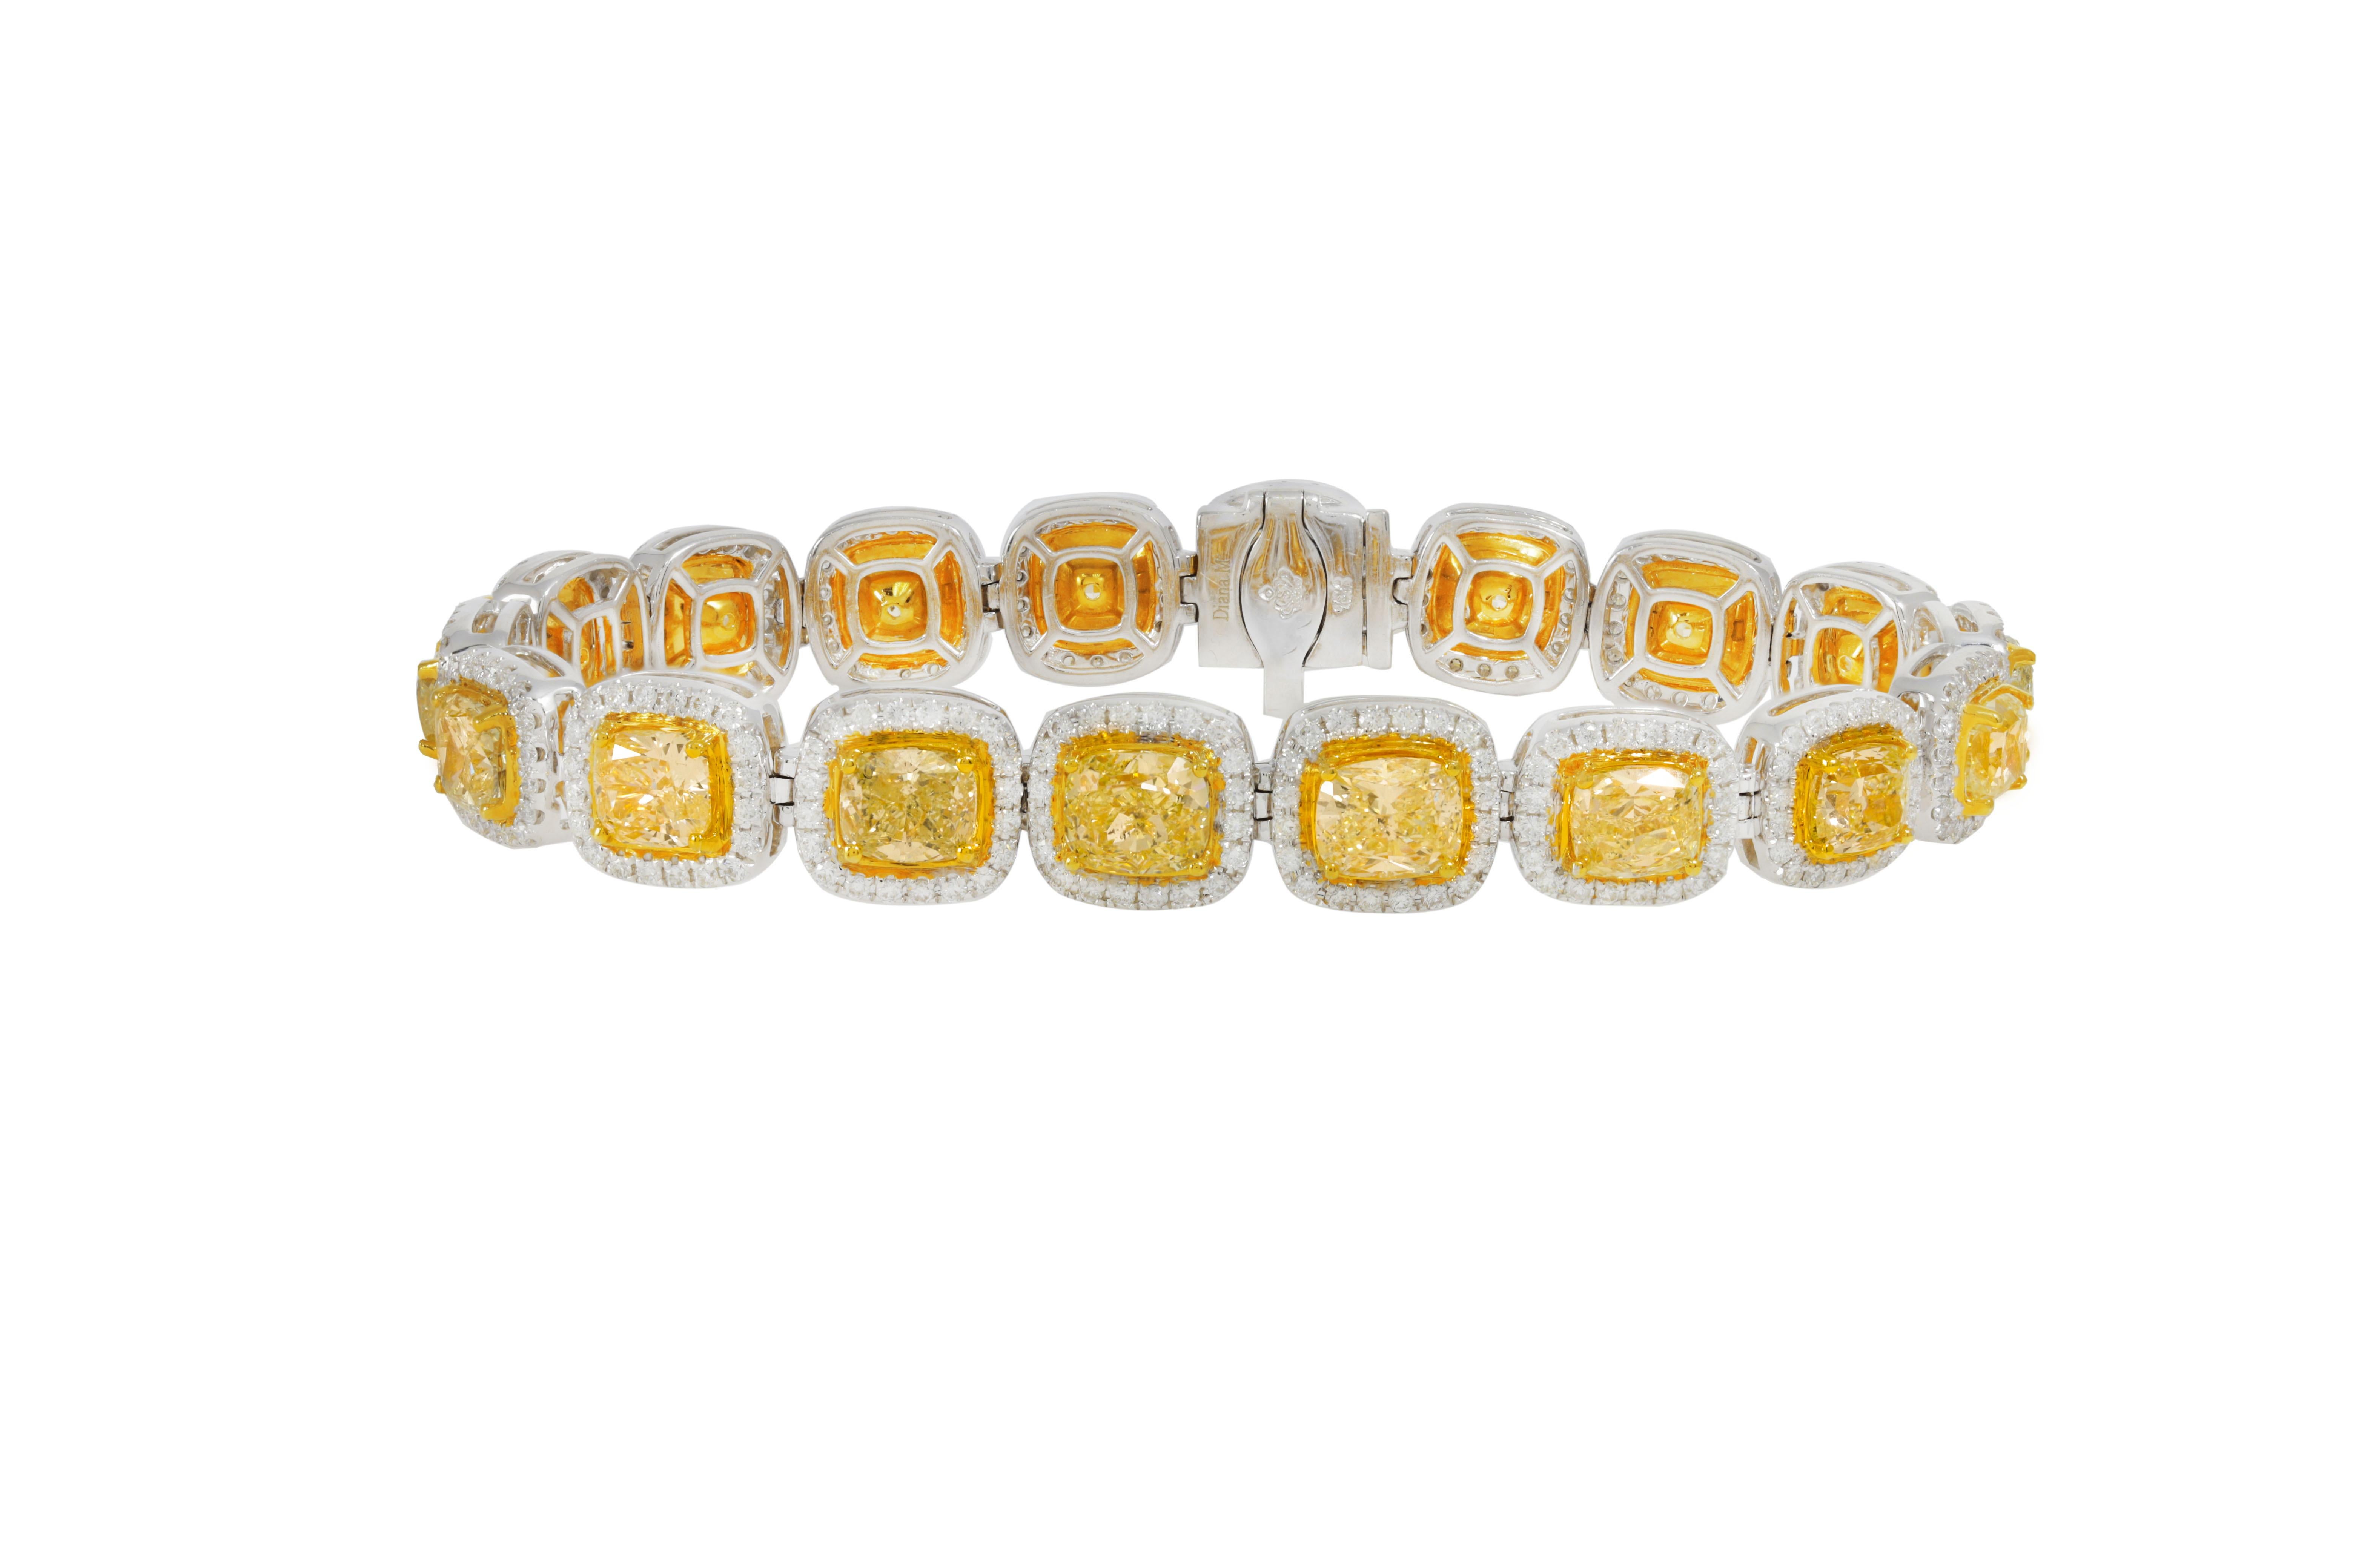 Cushion Cut Diana M. Diamond fashion braclet featuring 21.20cts of custion cut fancy yellows For Sale